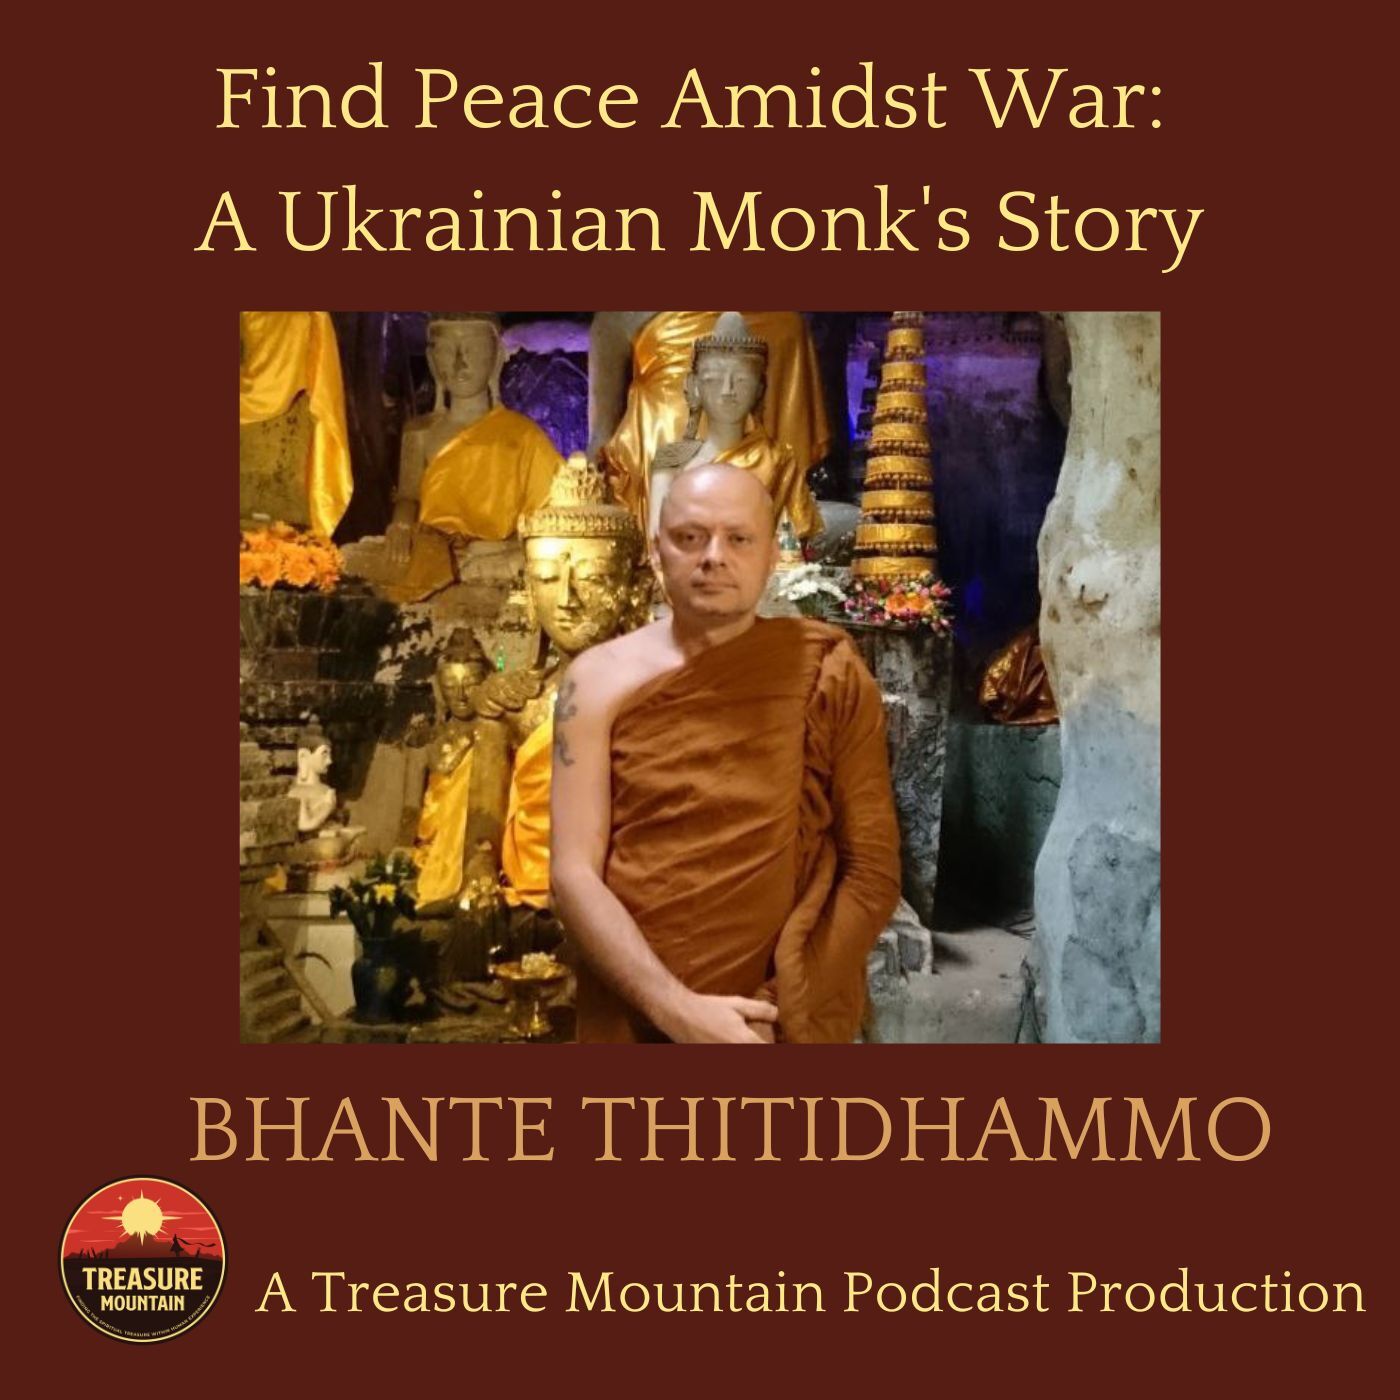 Finding Peace Amidst War: A Ukrainian Monk’s Story | Bhante Thithidhammo